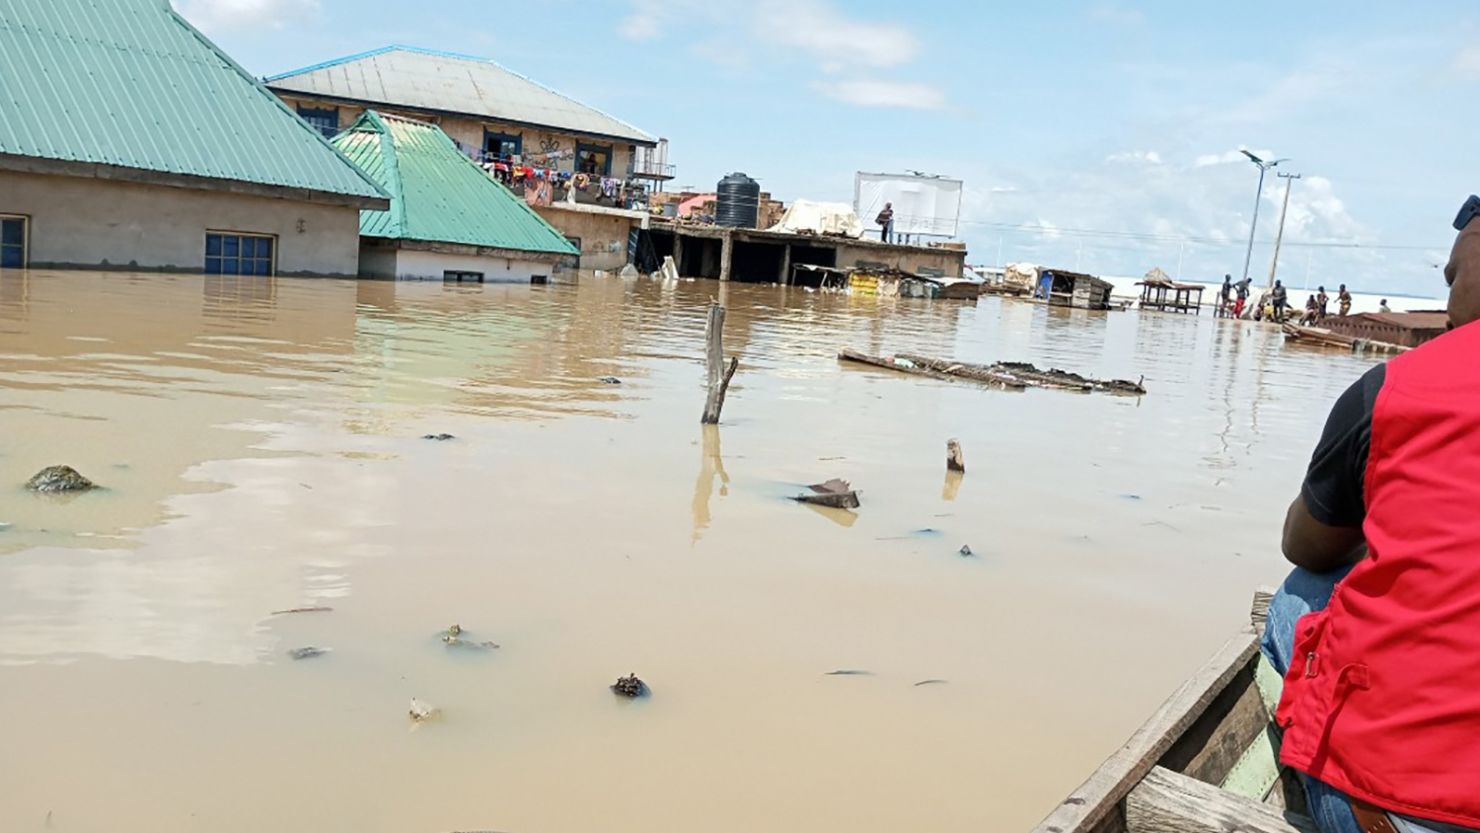 An official of the Nigerian Red Cross Society canoes through a submerged market in Lokoja, capital of north-central Kogi state on September 27, 2022.